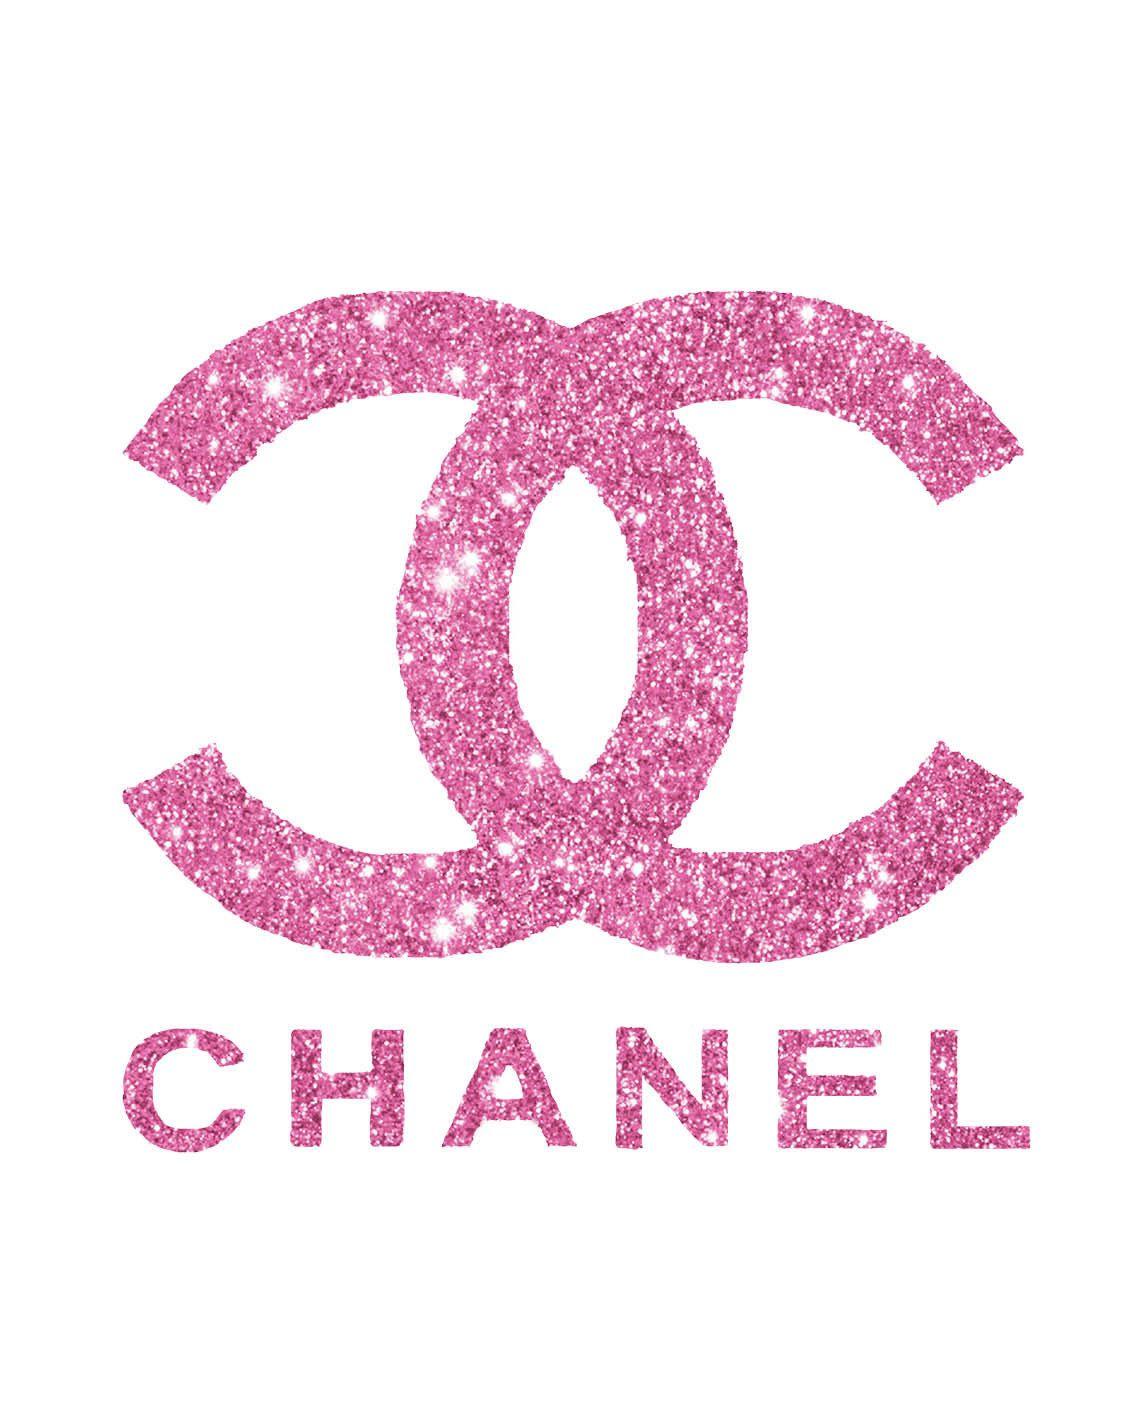 Pink Chanel Logo Wallpapers - Top Free Pink Chanel Logo Backgrounds ...